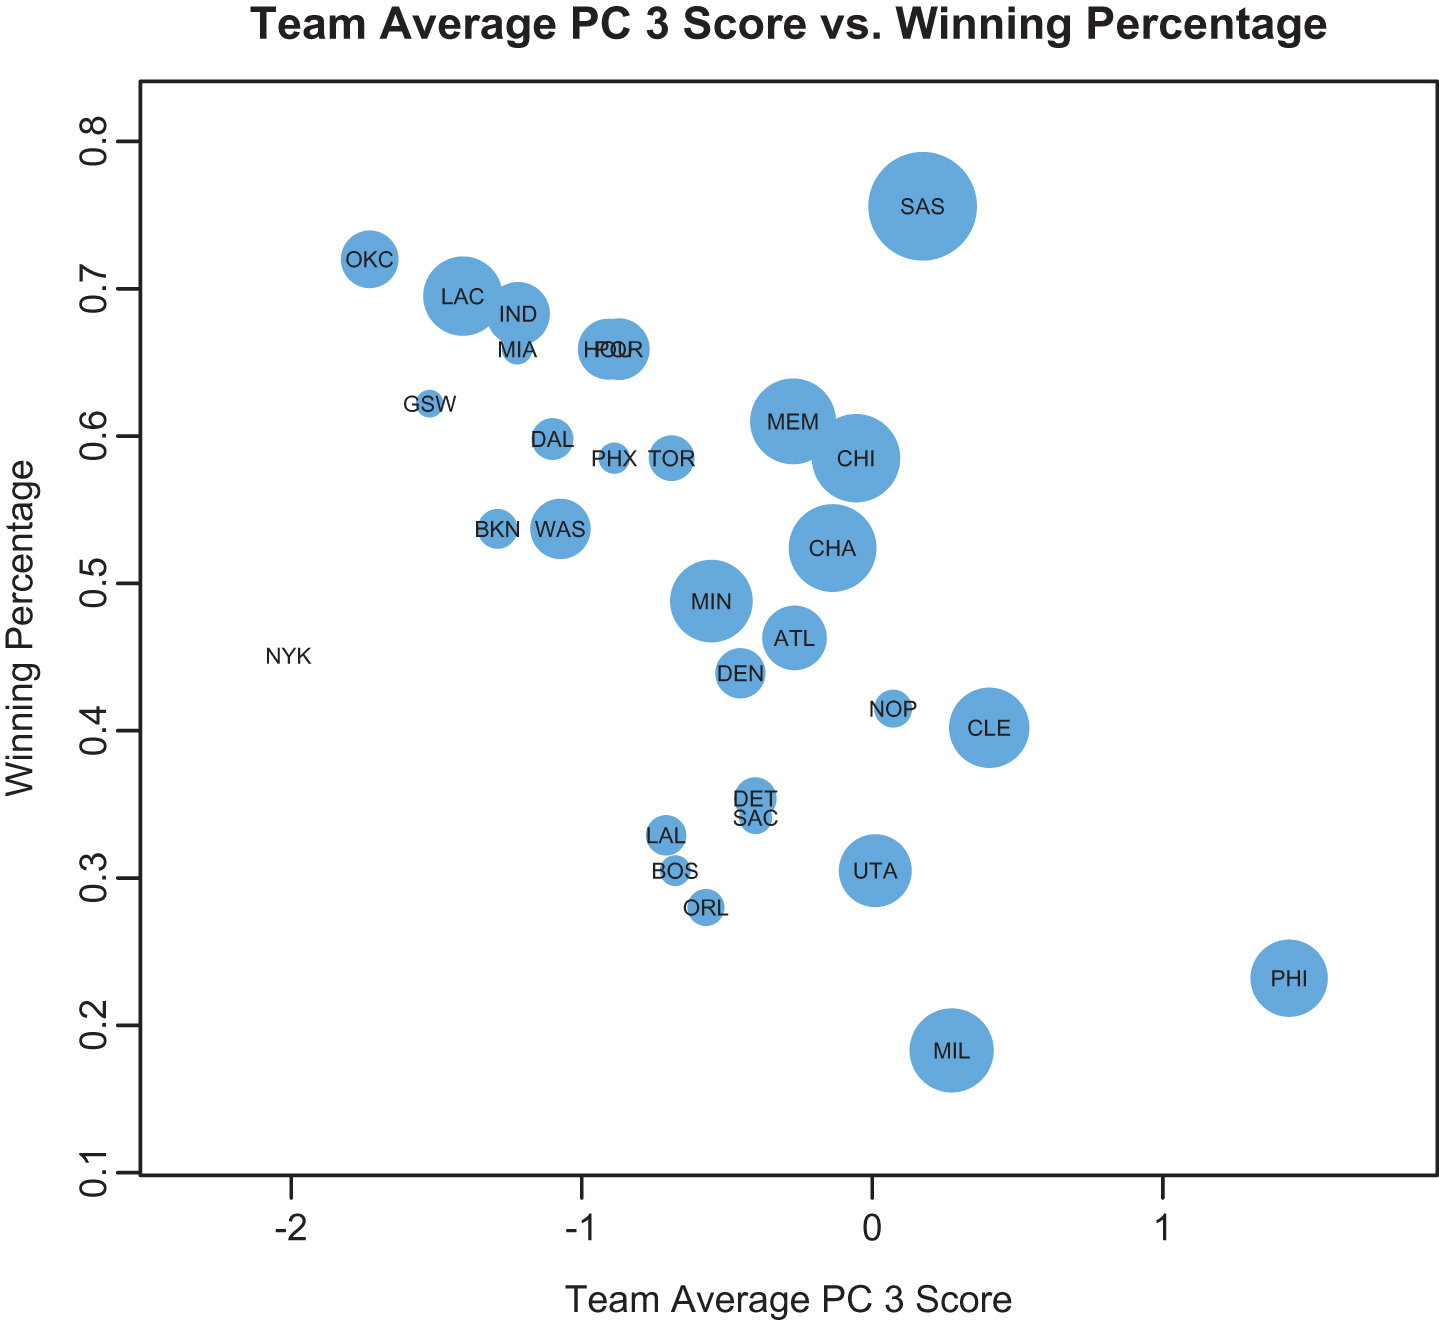 Team 
average PC 3 scores by regular season winning percentage. Point size determined by regression-weighted sum of PC 2 and PC 4 scores (color online).